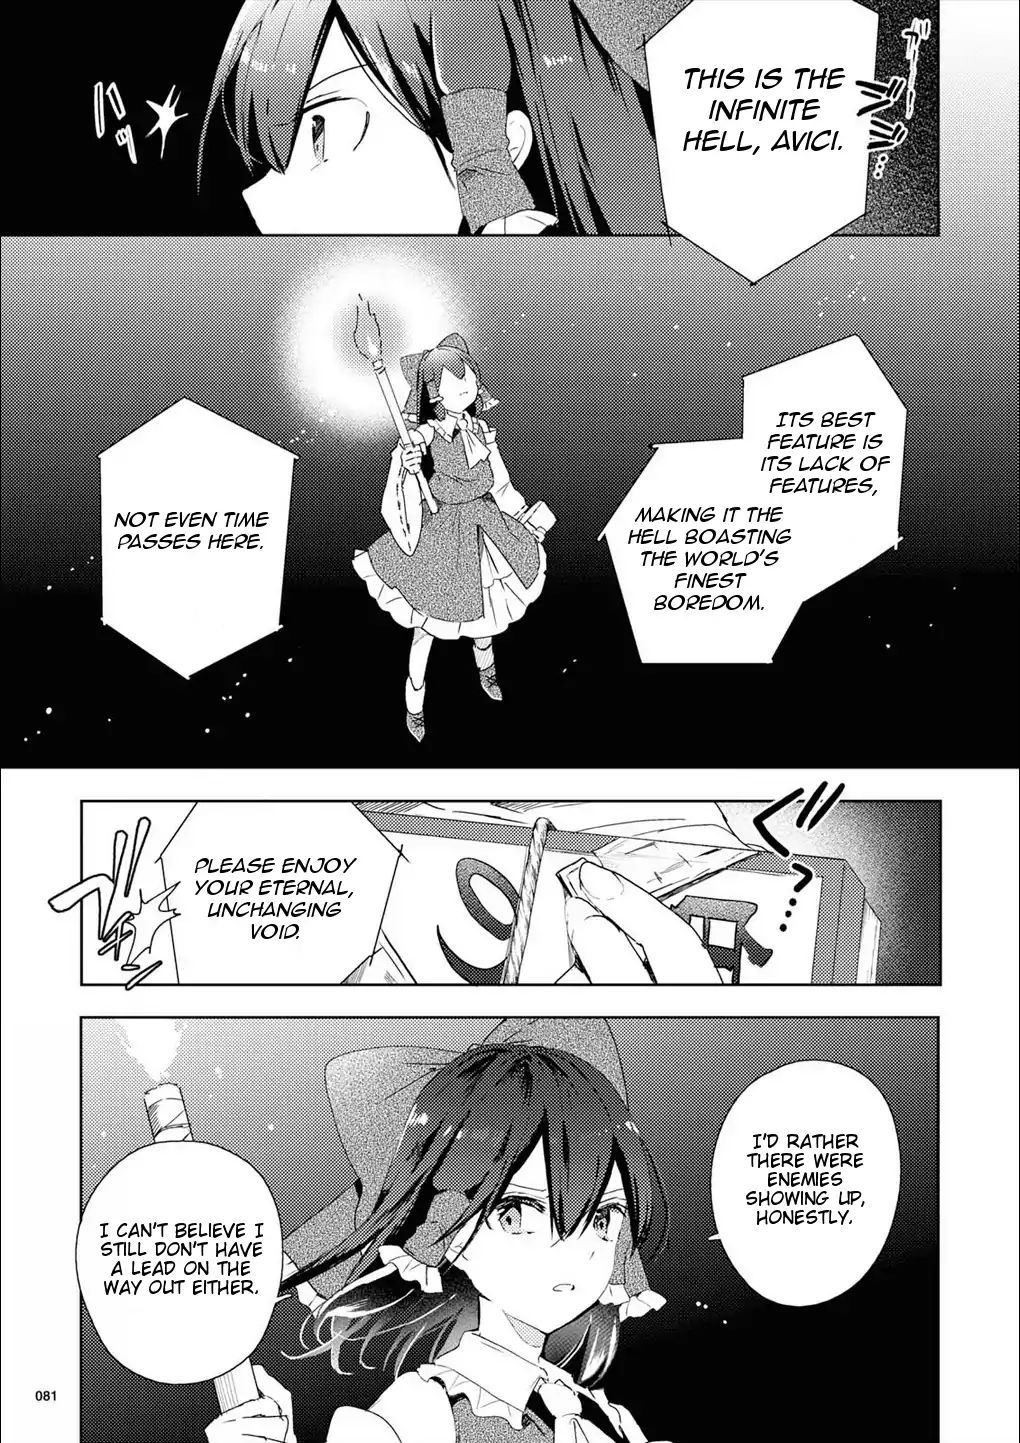 Touhou Ibarakasen - Wild And Horned Hermit Vol.10 Chapter 49: The Inhuman Talent Embracing Wickedness (Part 1) - Picture 3